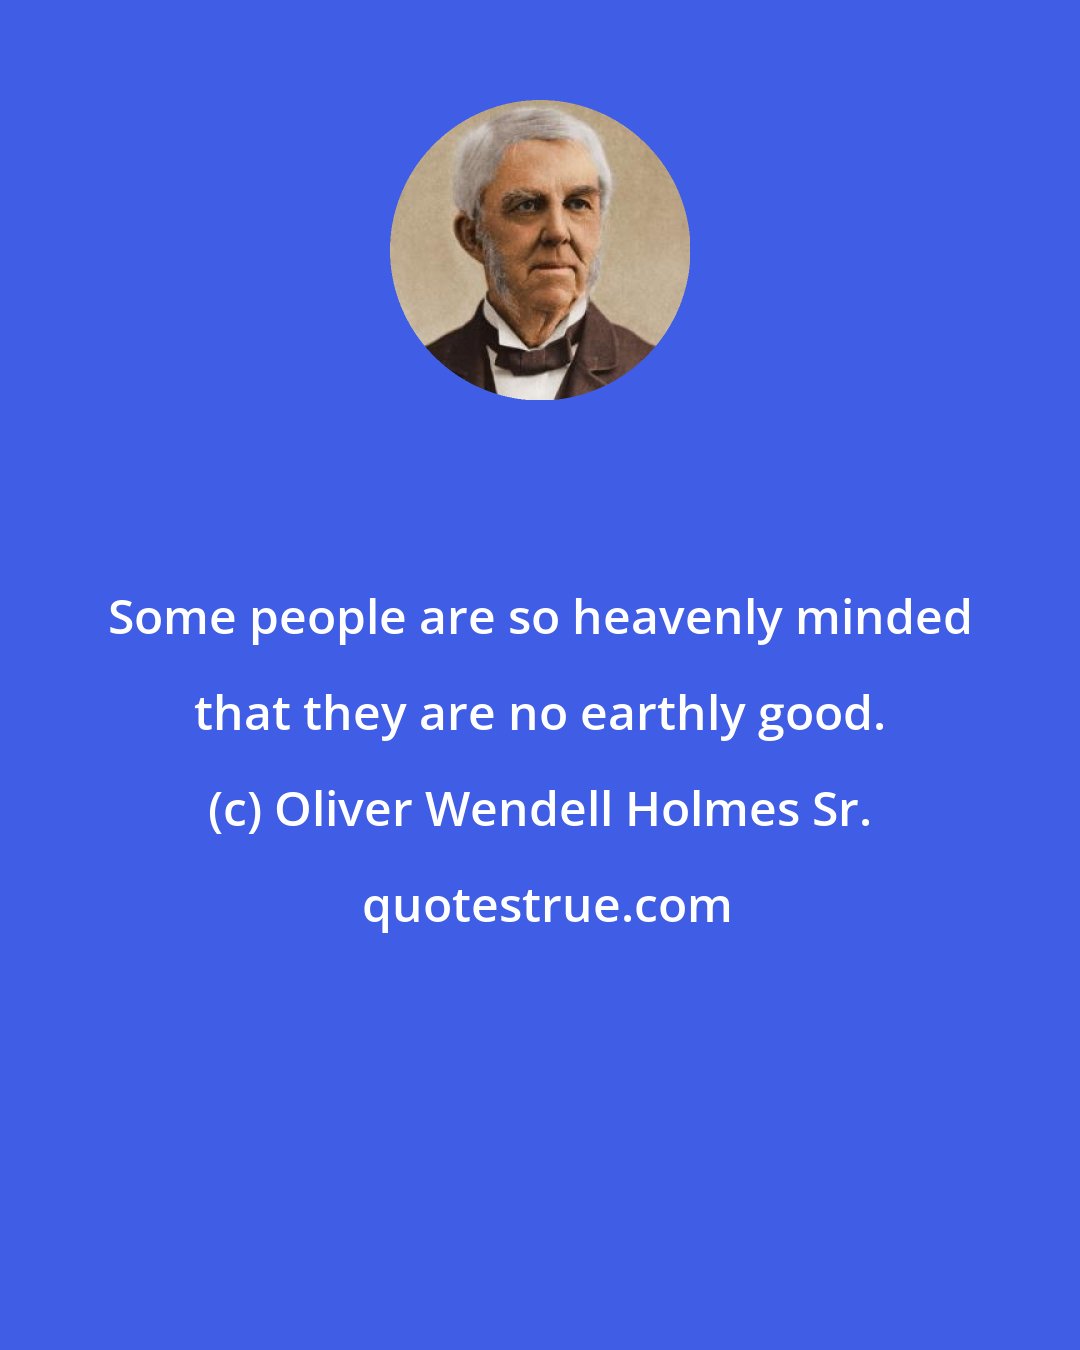 Oliver Wendell Holmes Sr.: Some people are so heavenly minded that they are no earthly good.